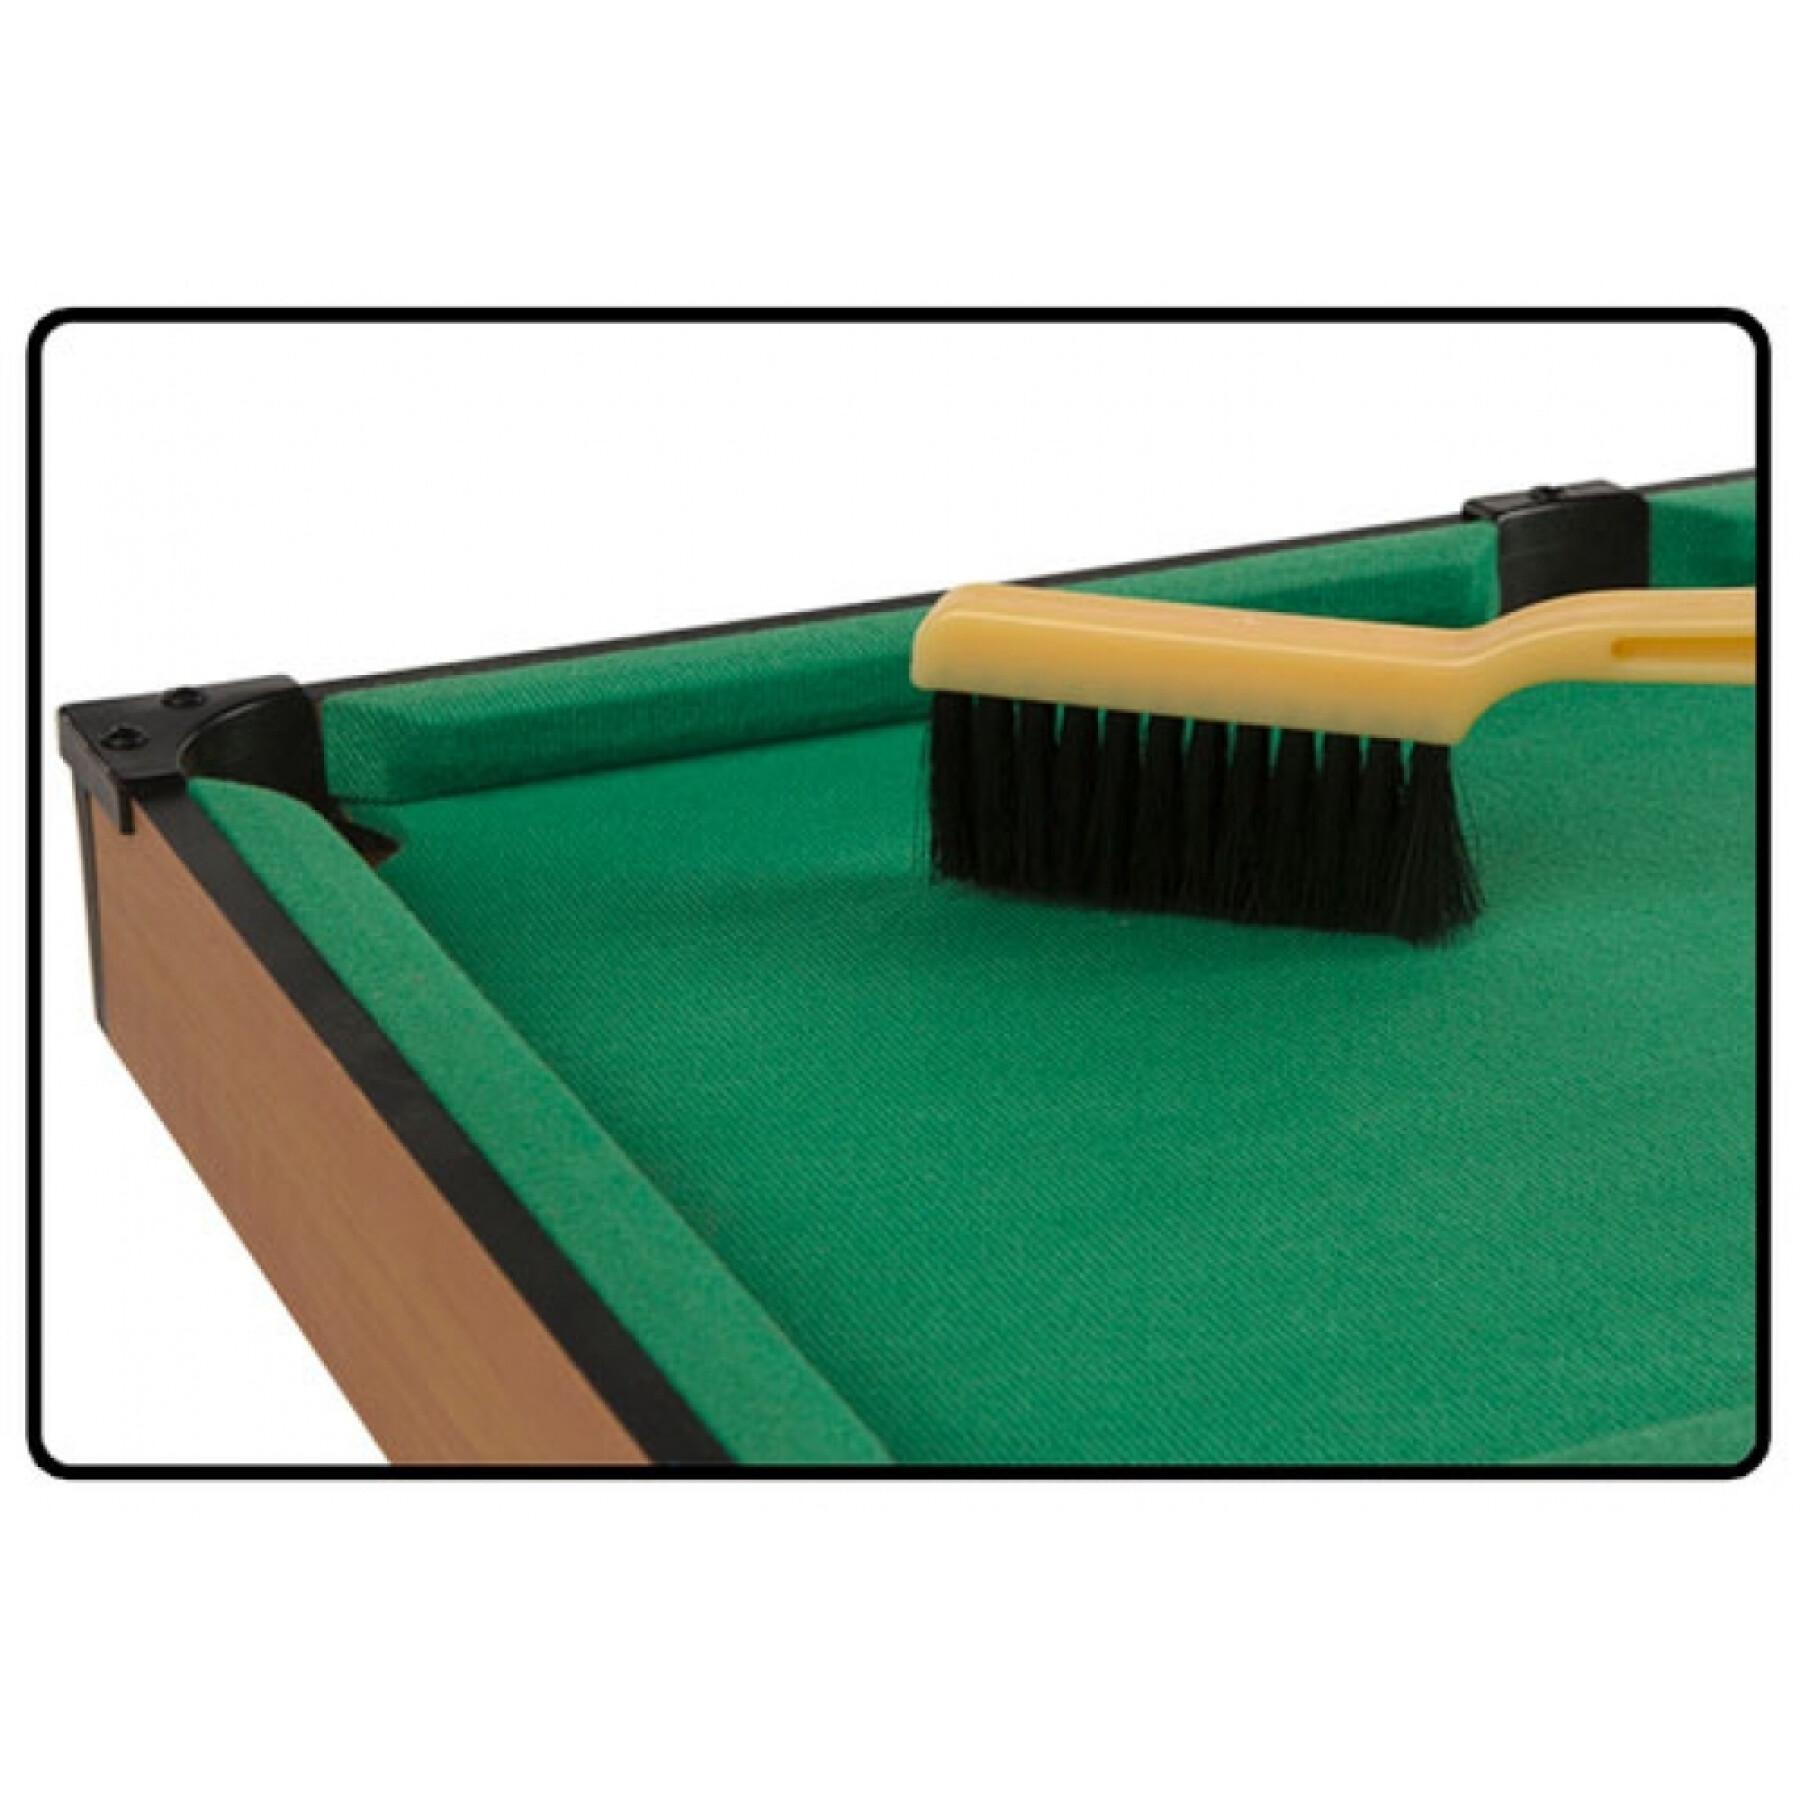 Wooden pool table CB Games